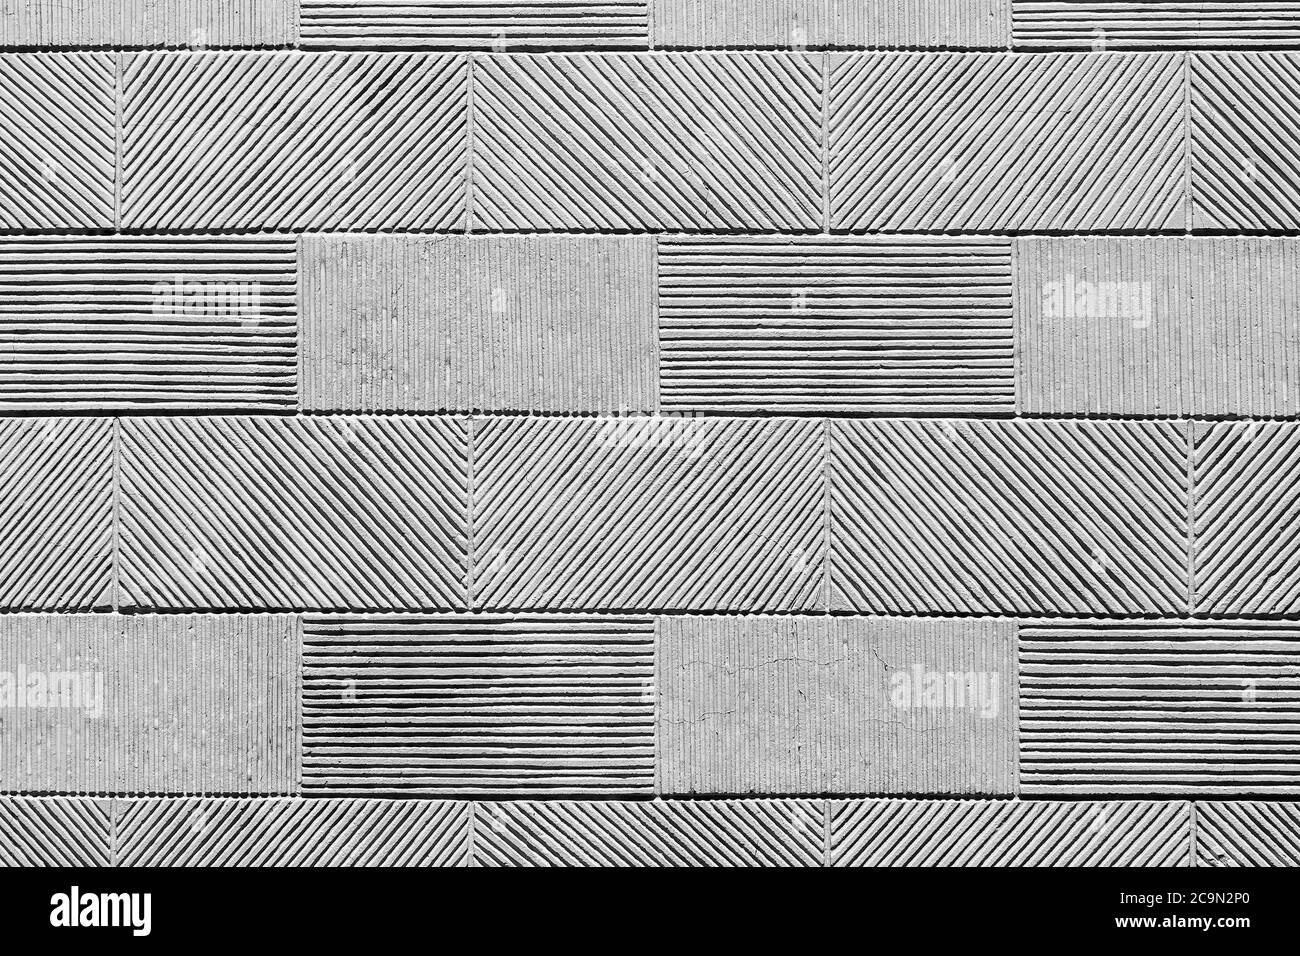 Texture of a wall from a stone tile, a striped pattern of a rectangular tile. Stock Photo